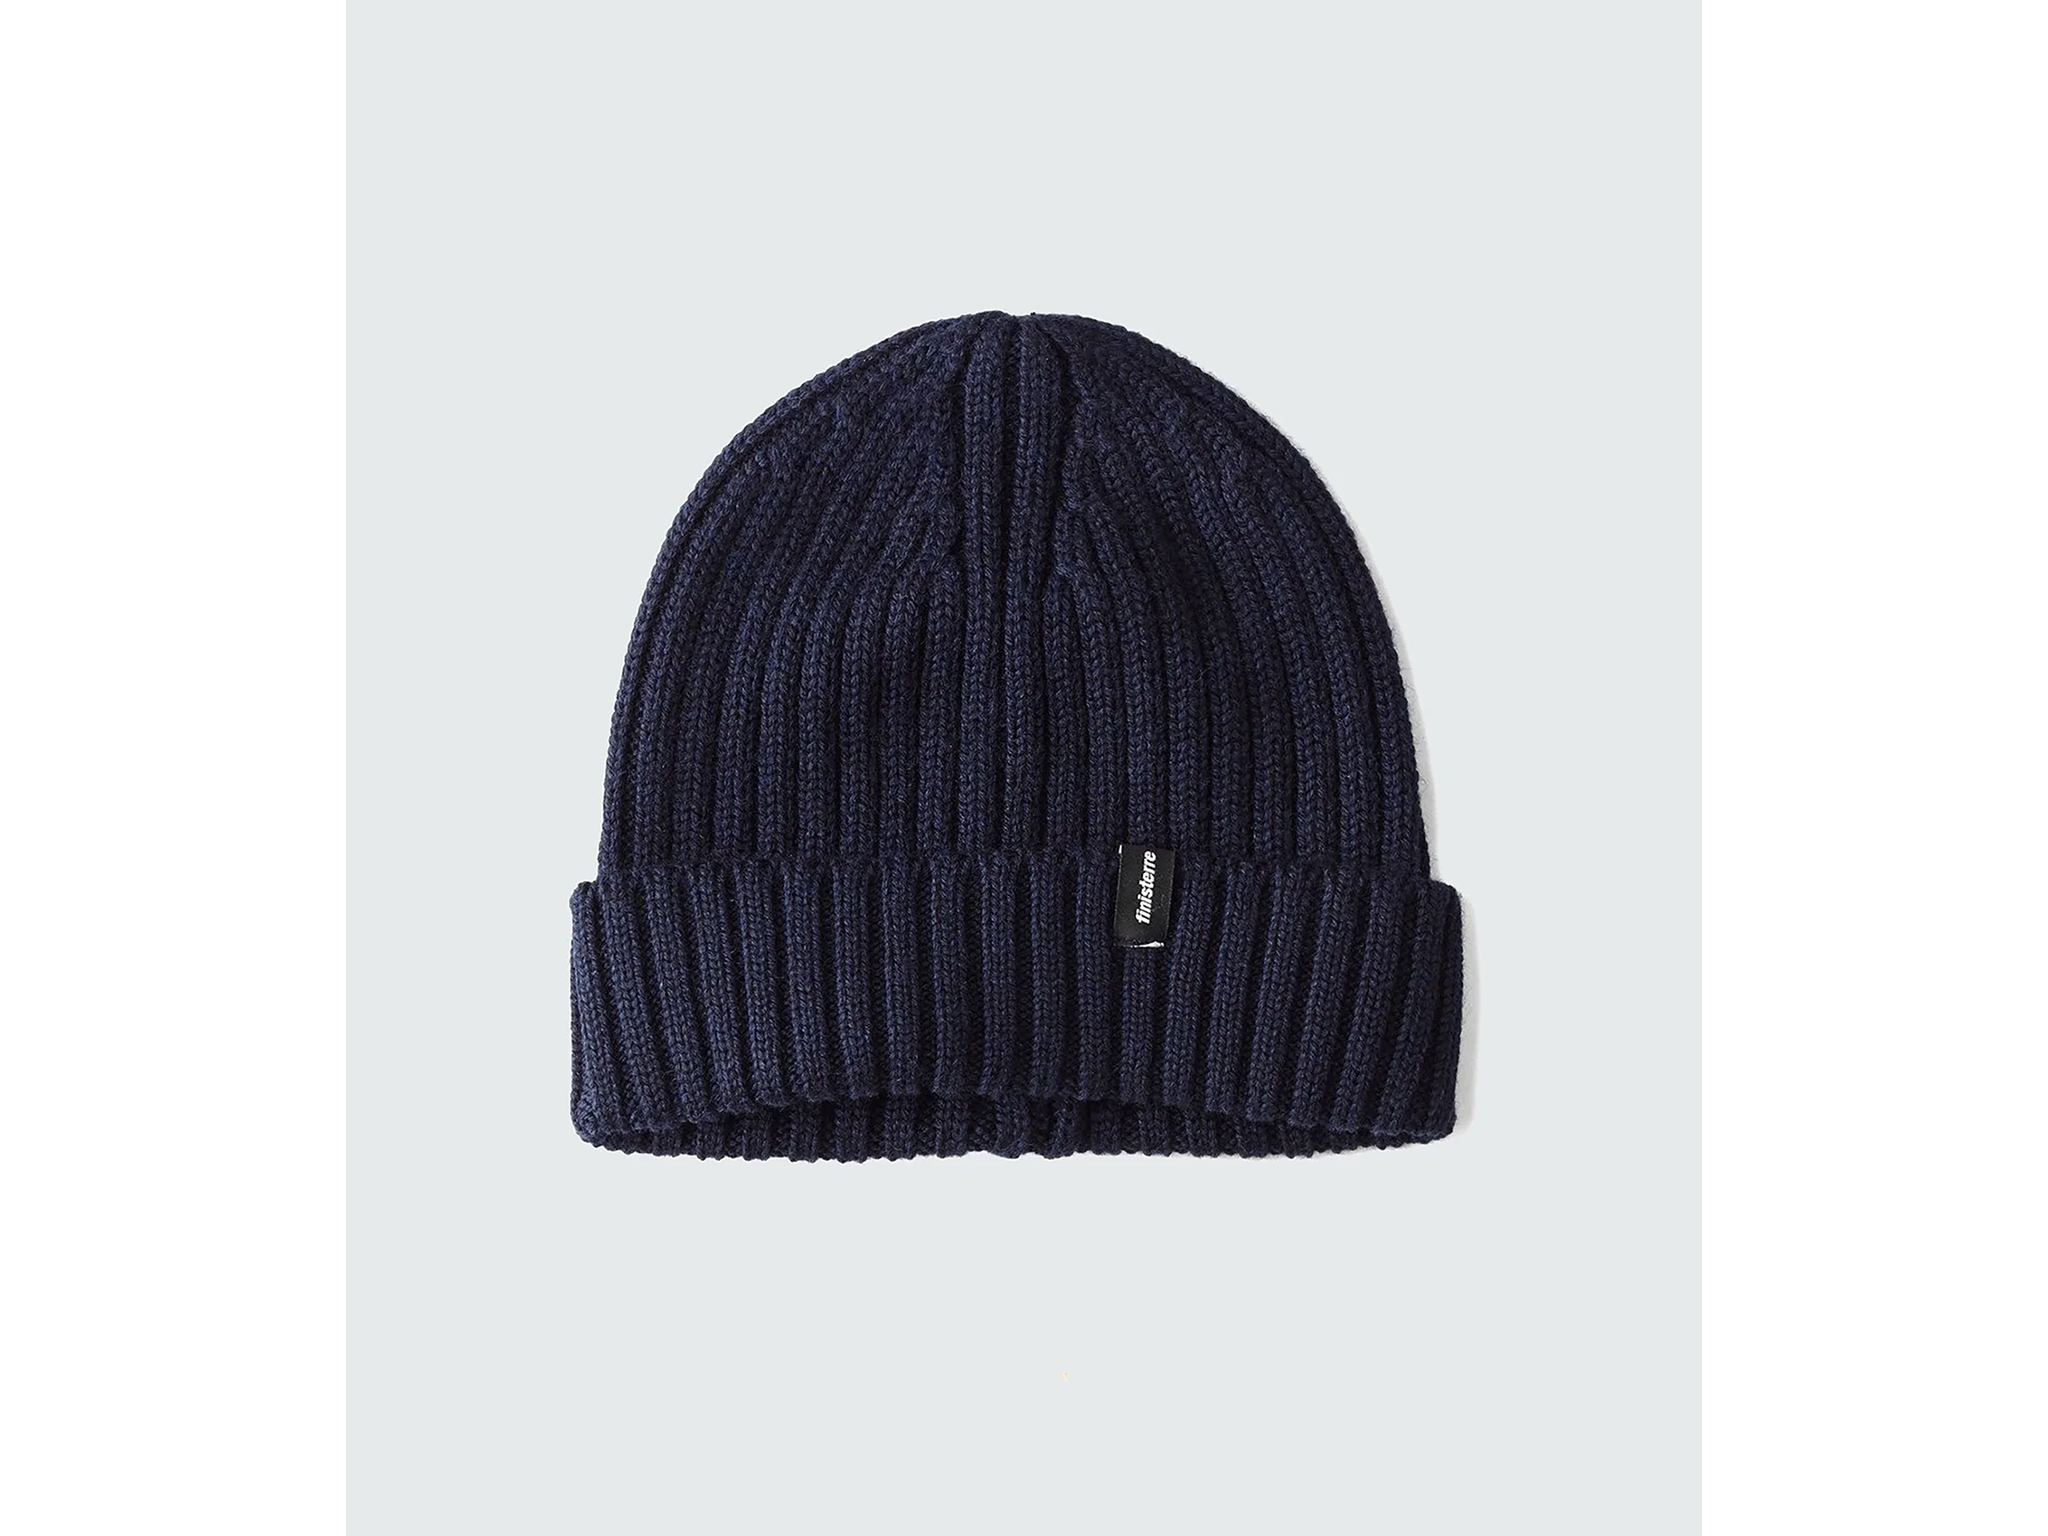 Finisterre fisherman's beanie